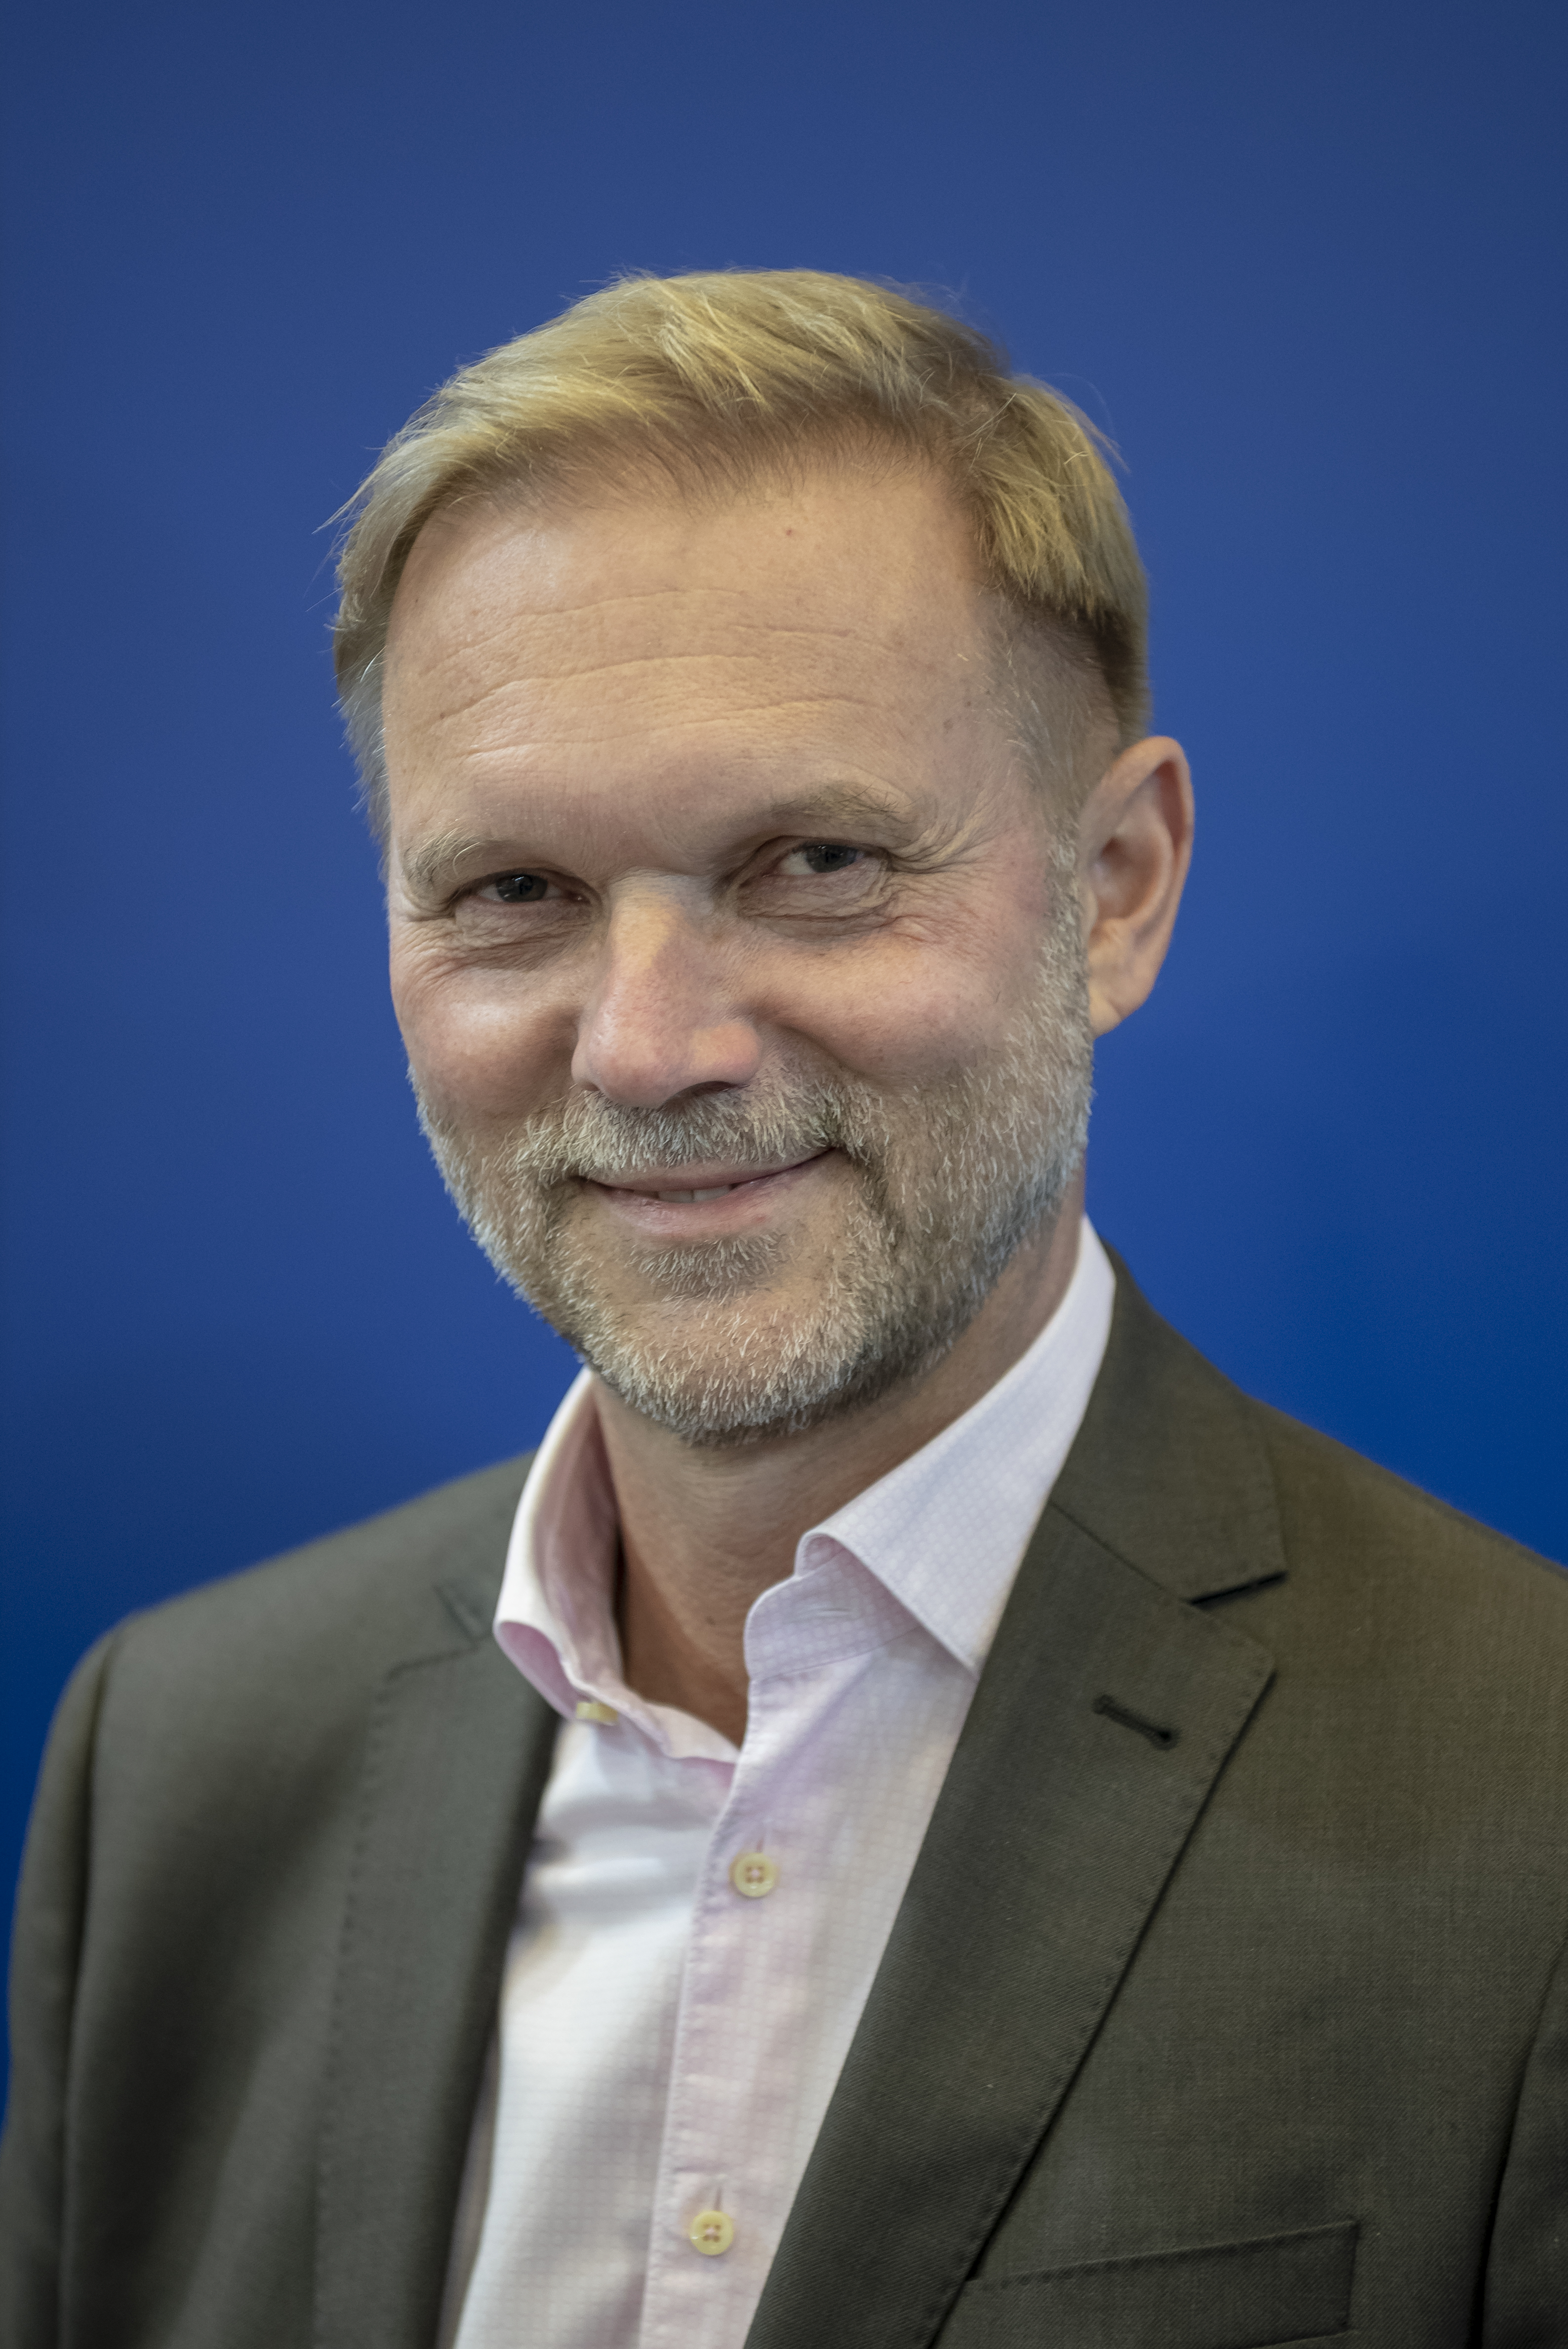 The EPMA has appointed Ralf Carlstrom, Digital Metal AB, as its president.